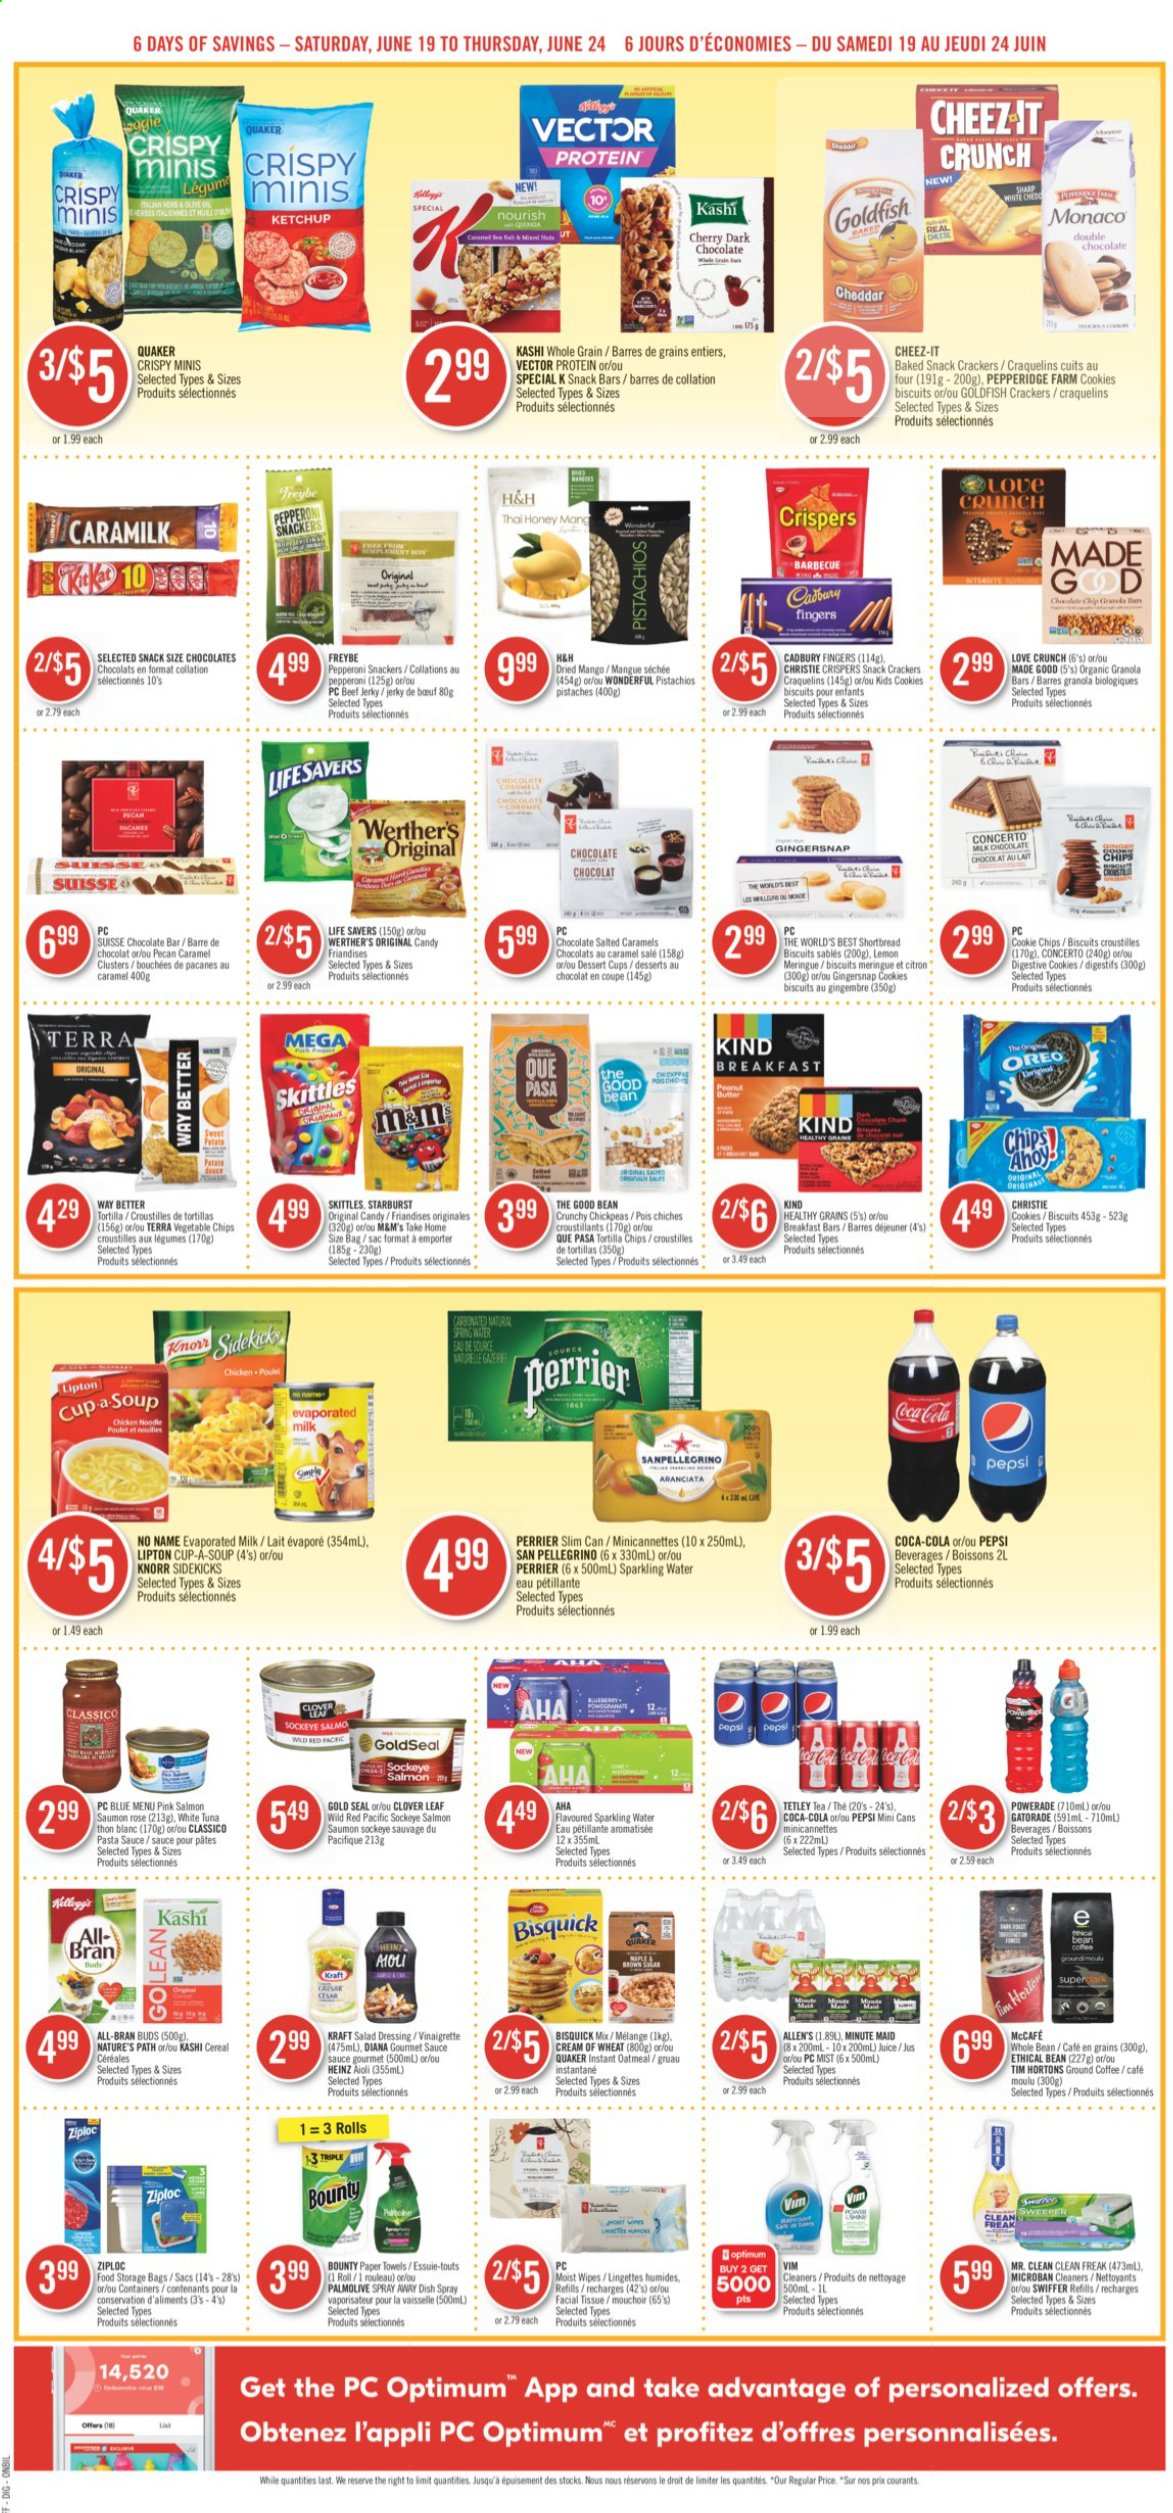 thumbnail - Shoppers Drug Mart Flyer - June 19, 2021 - June 24, 2021 - Sales products - cookies, milk chocolate, snack, Bounty, crackers, biscuit, dark chocolate, Cadbury, Digestive, Skittles, snack bar, Starburst, chocolate bar, tortilla chips, vegetable chips, Goldfish, Cheez-It, Bisquick, oatmeal, salmon, Heinz, pasta sauce, soup, cereals, Cream of Wheat, granola bar, Quaker, All-Bran, chickpeas, salad dressing, vinaigrette dressing, dressing, Classico, Kraft®, honey, dried fruit, pistachios, Coca-Cola, Powerade, Pepsi, juice, Clover, Perrier, Gatorade, fruit punch, sparkling water, San Pellegrino, tea, coffee, ground coffee, McCafe, wipes, tissues, kitchen towels, paper towels, Swiffer, Palmolive, Ziploc, Oreo, Knorr, tuna, chips, M&M's. Page 4.